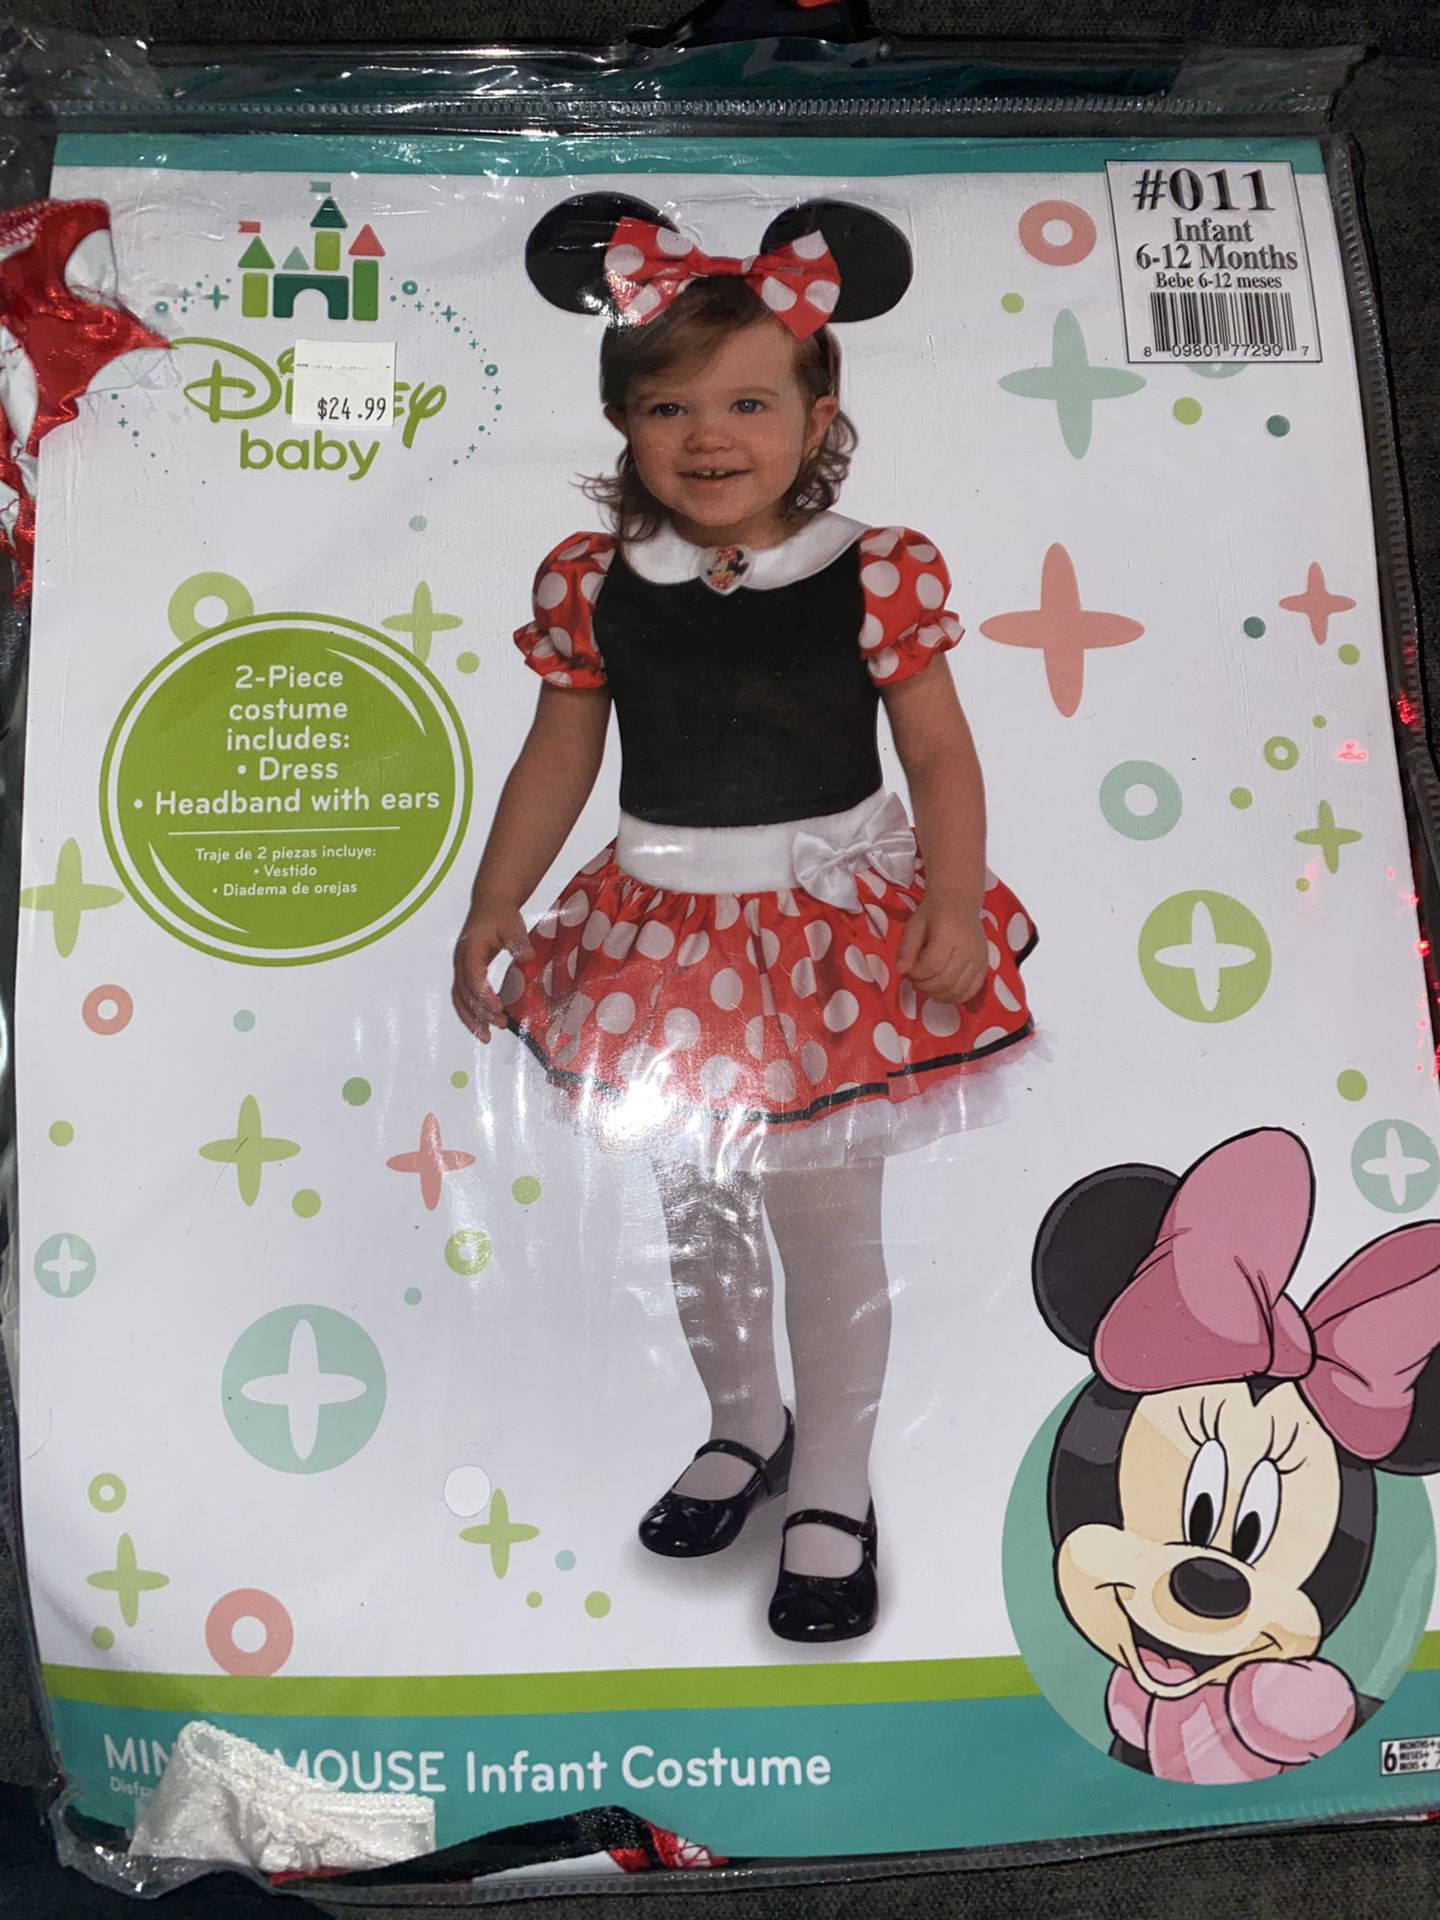 Minnie Mouse infant costume